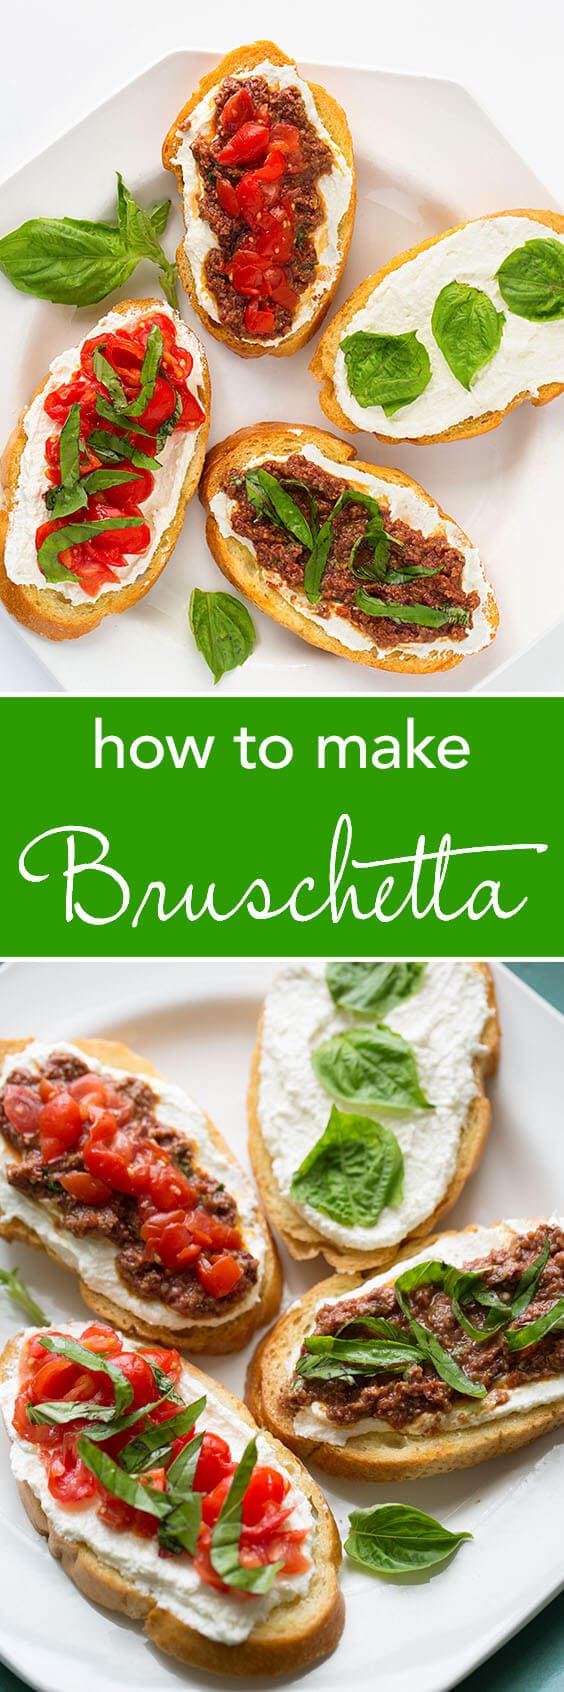 We show you how to make Bruschetta. Easy and delicious! simplyhappyfoodie.com